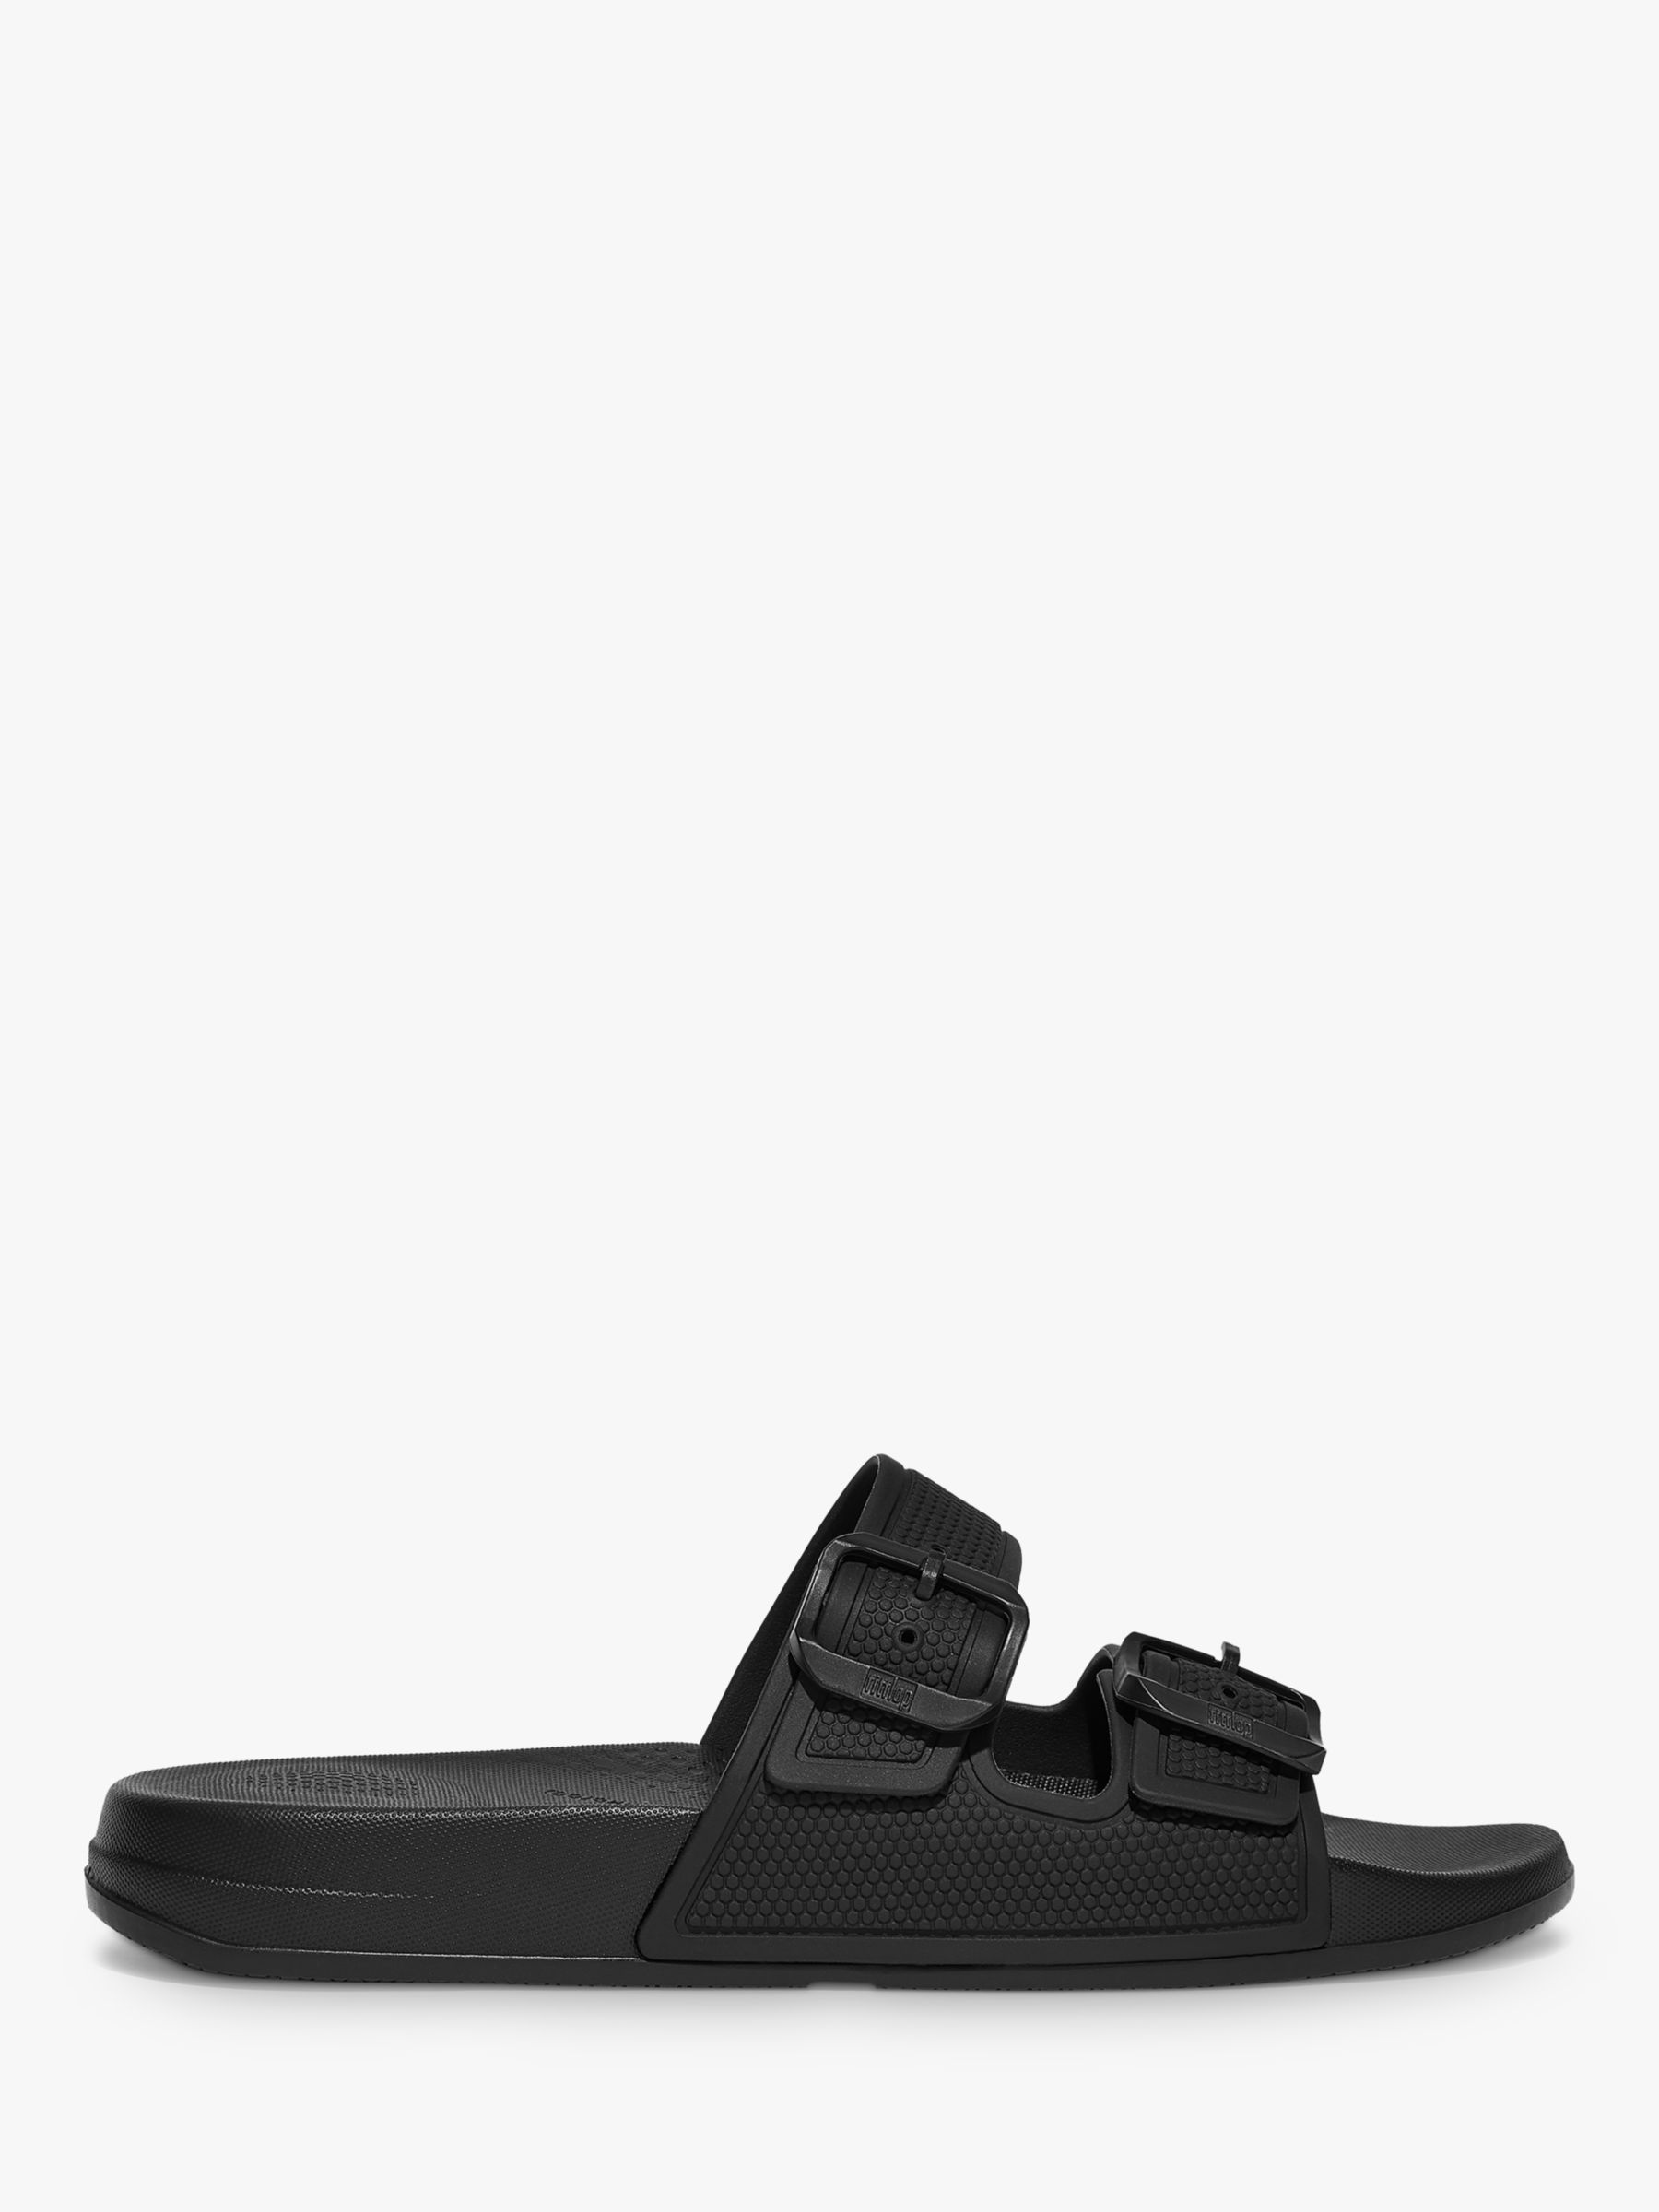 FitFlop IQushion Slider Sandals, Black at John Lewis & Partners